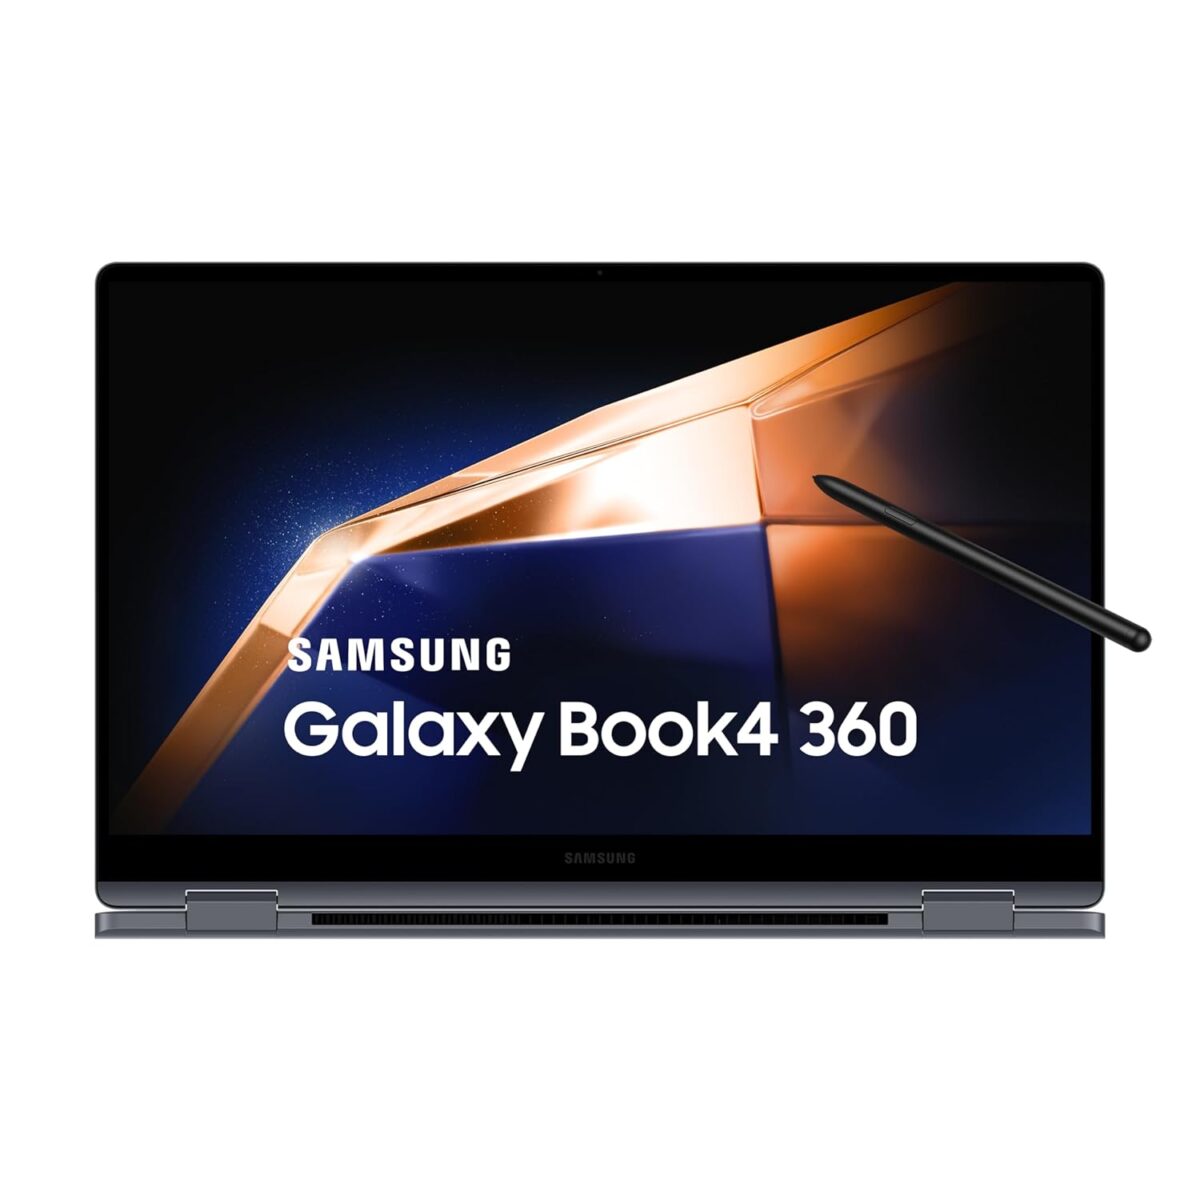 Samsung Galaxy Book4 360 Series: Available Now in India! [ Pre-orders live on Amazon.in ]